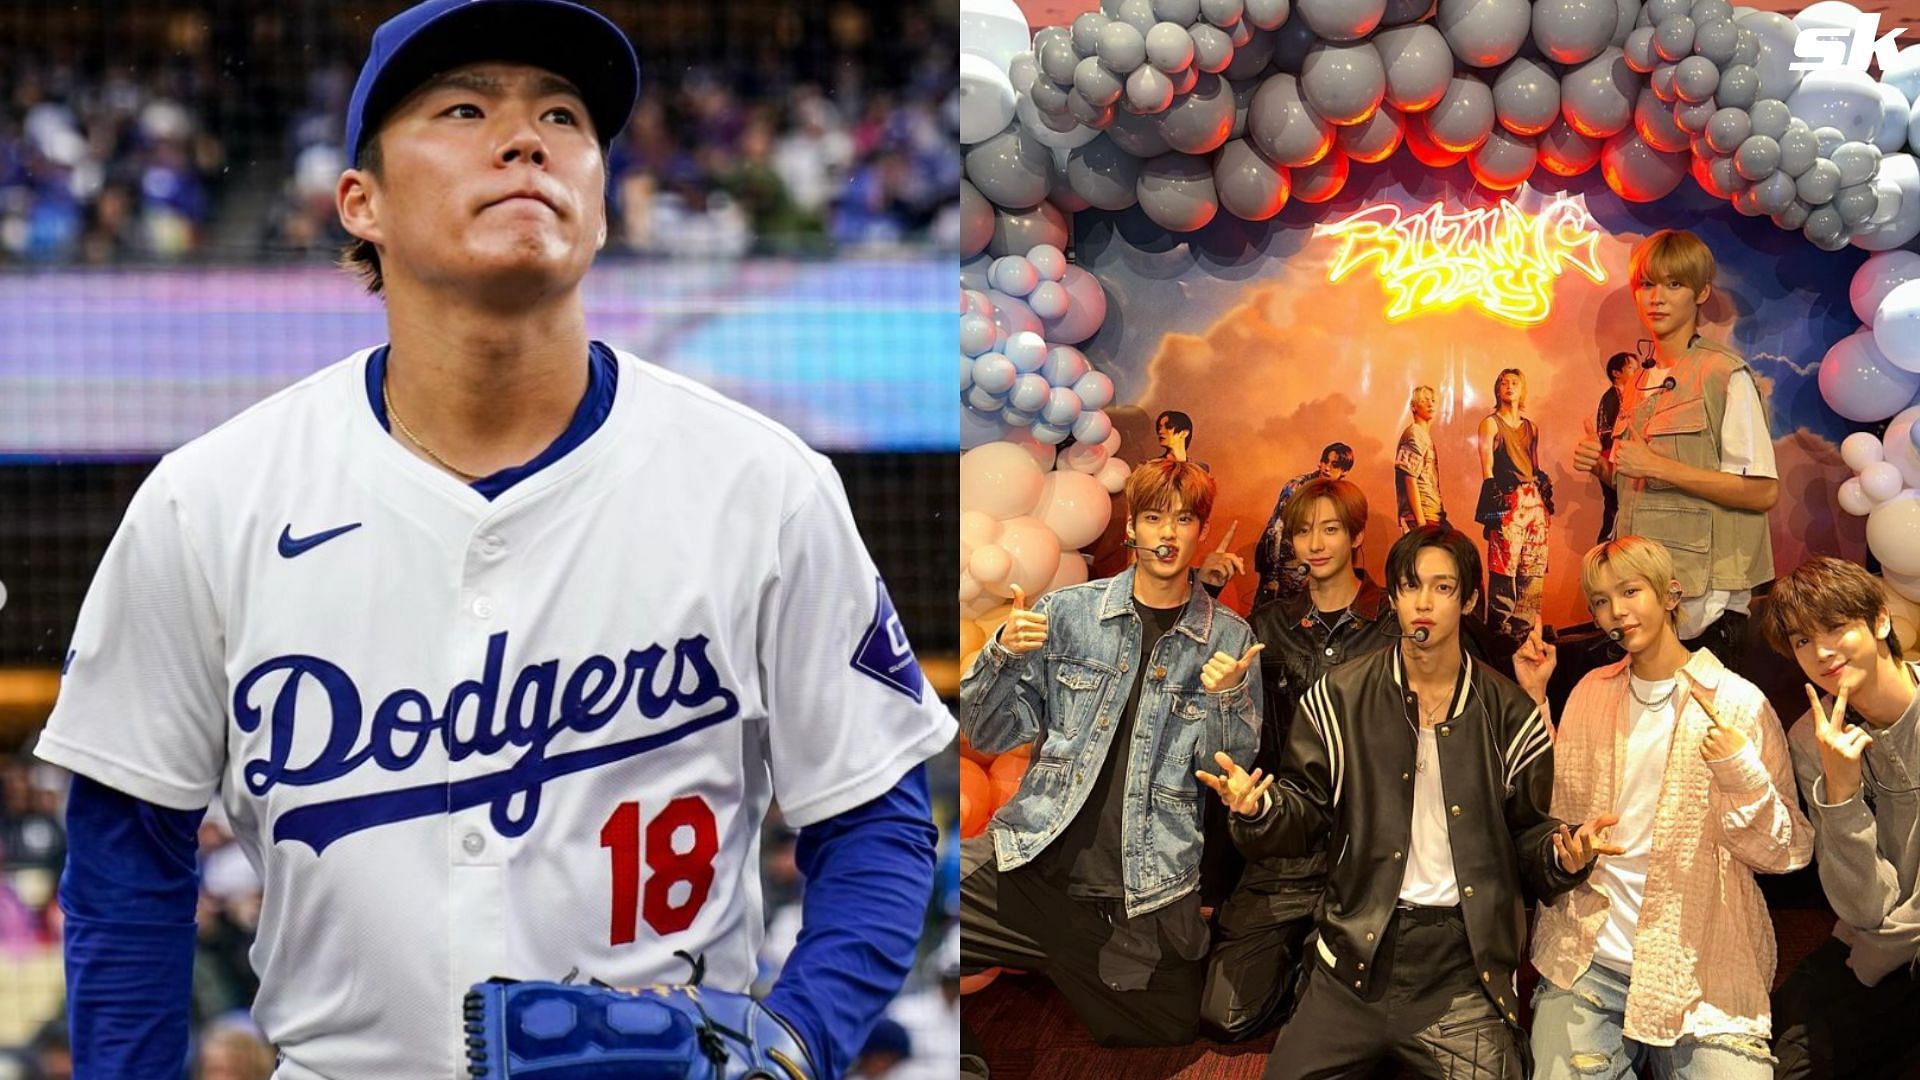 RIIZE members linked up with Yamamoto ahead of their Dodger Stadium performance